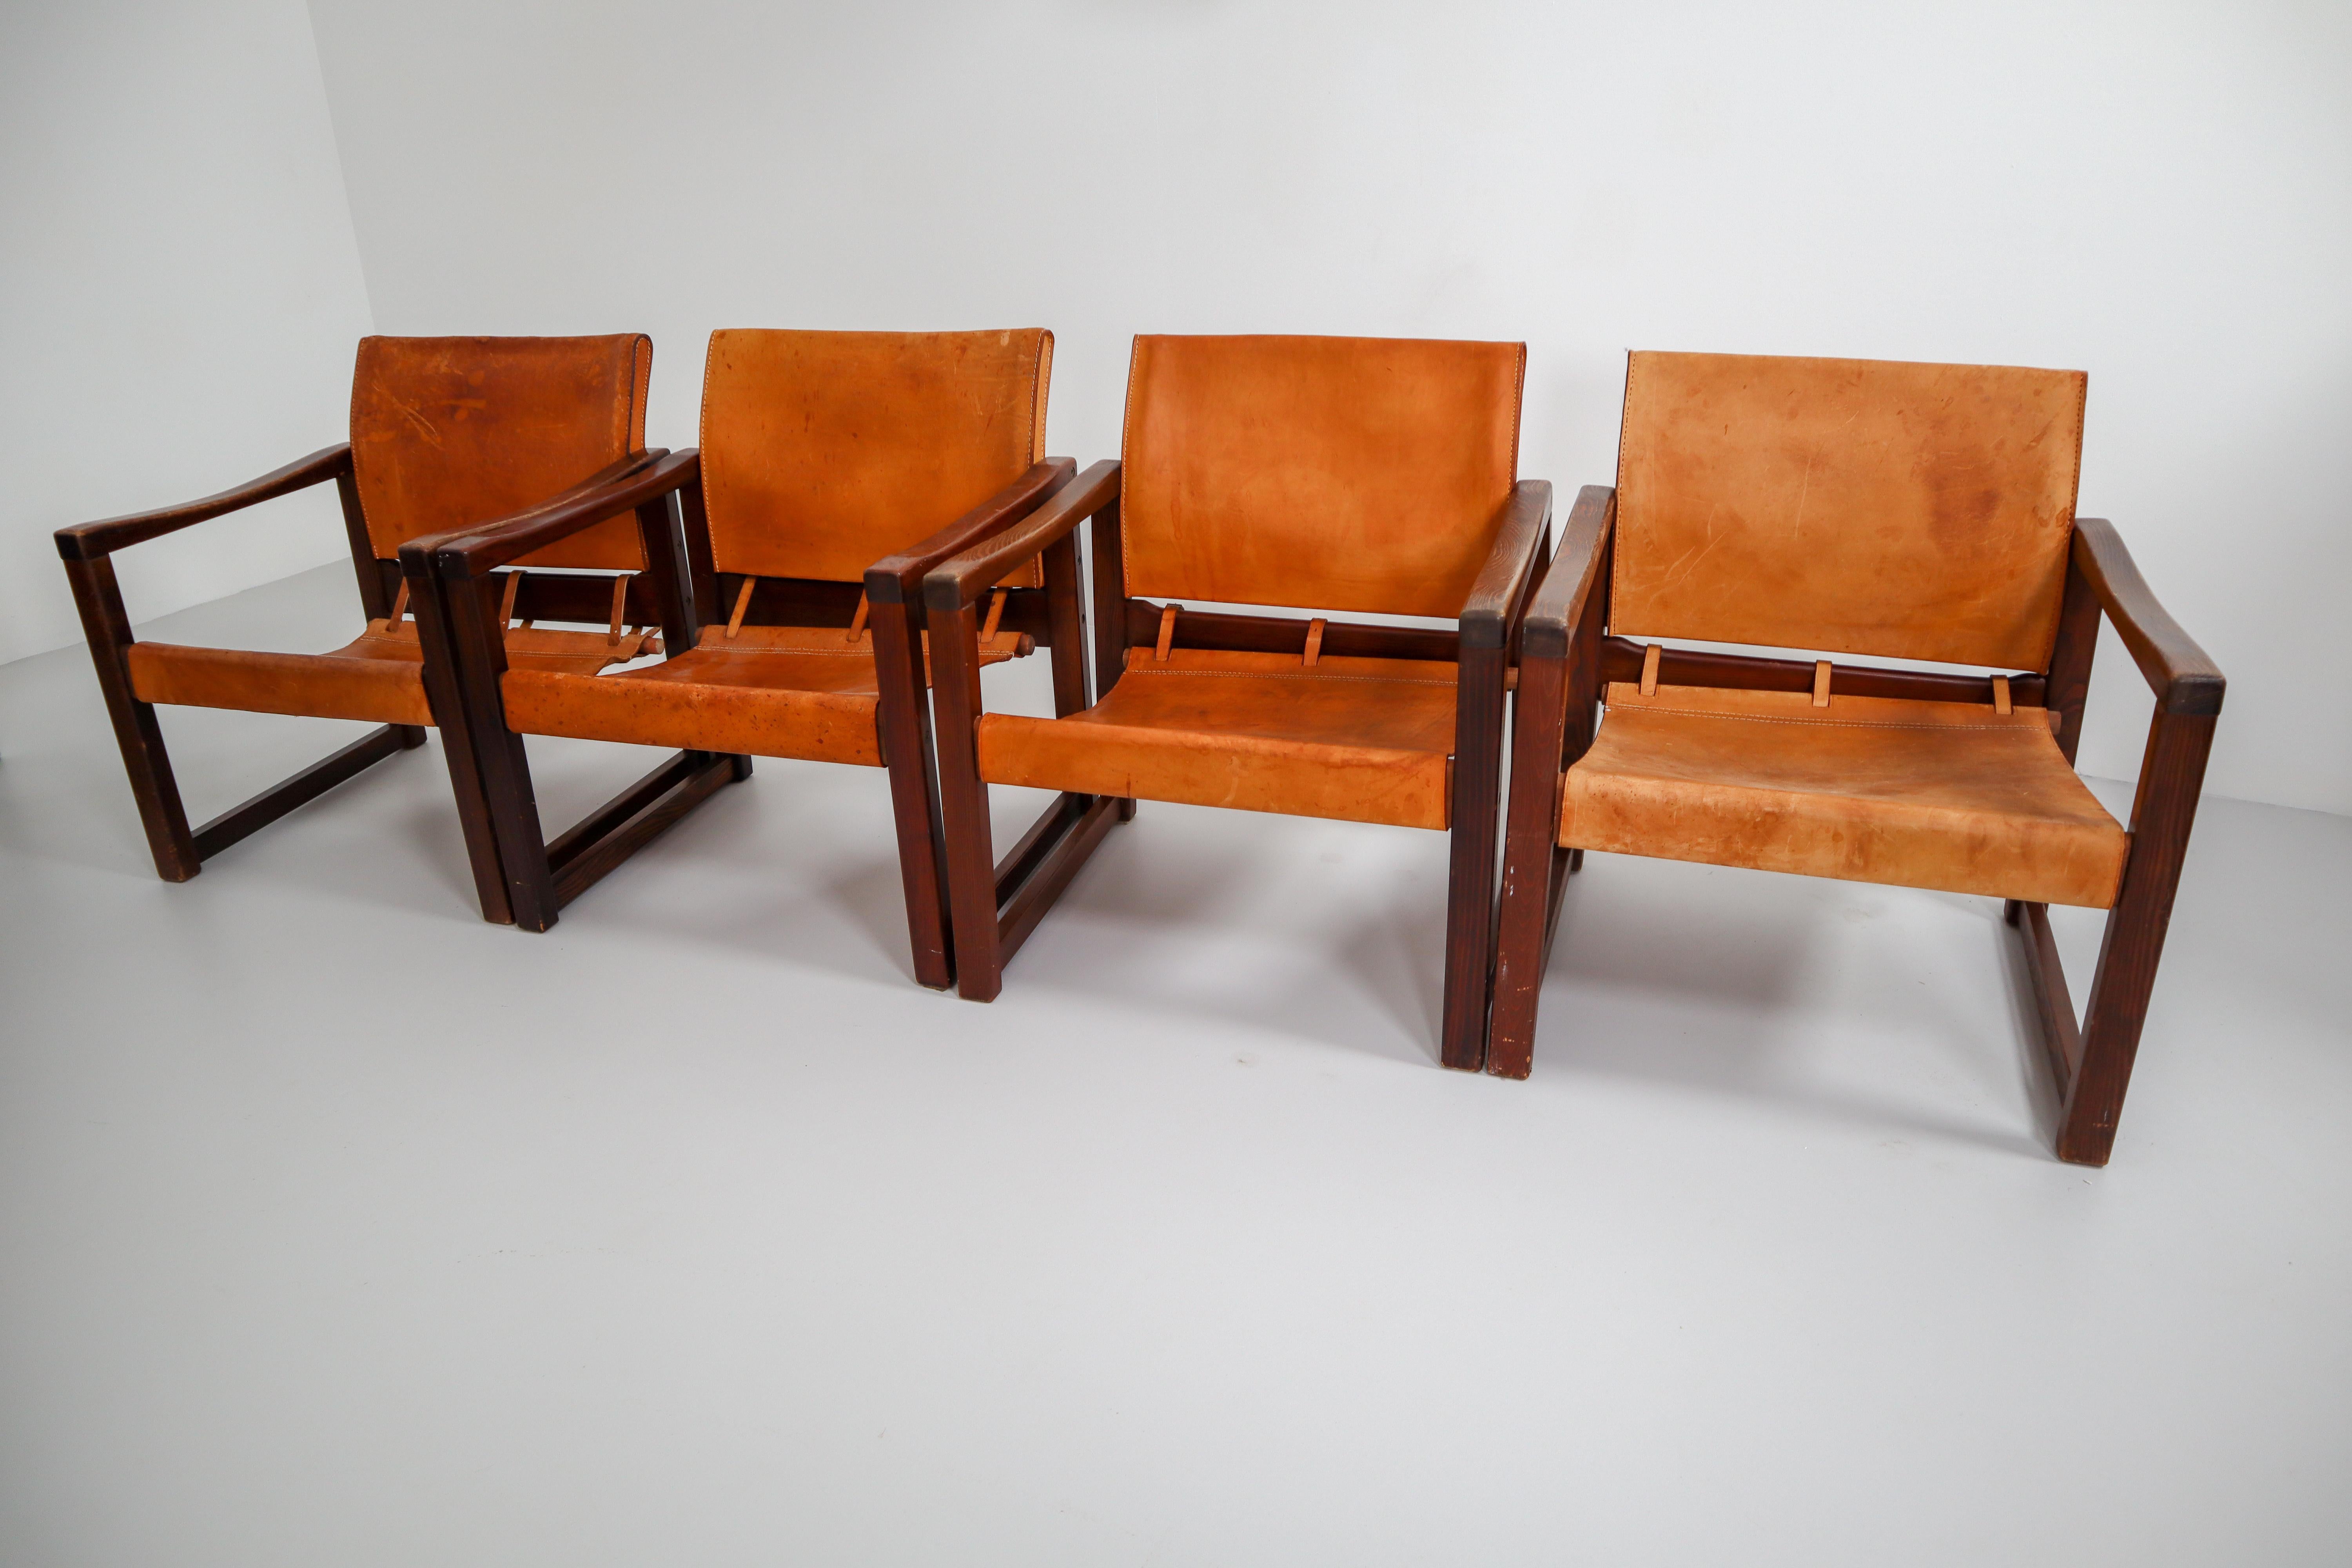 Ten Midcentury Safari Lounge Chairs in Patinated Cognac Saddle Leather, 1970s 7